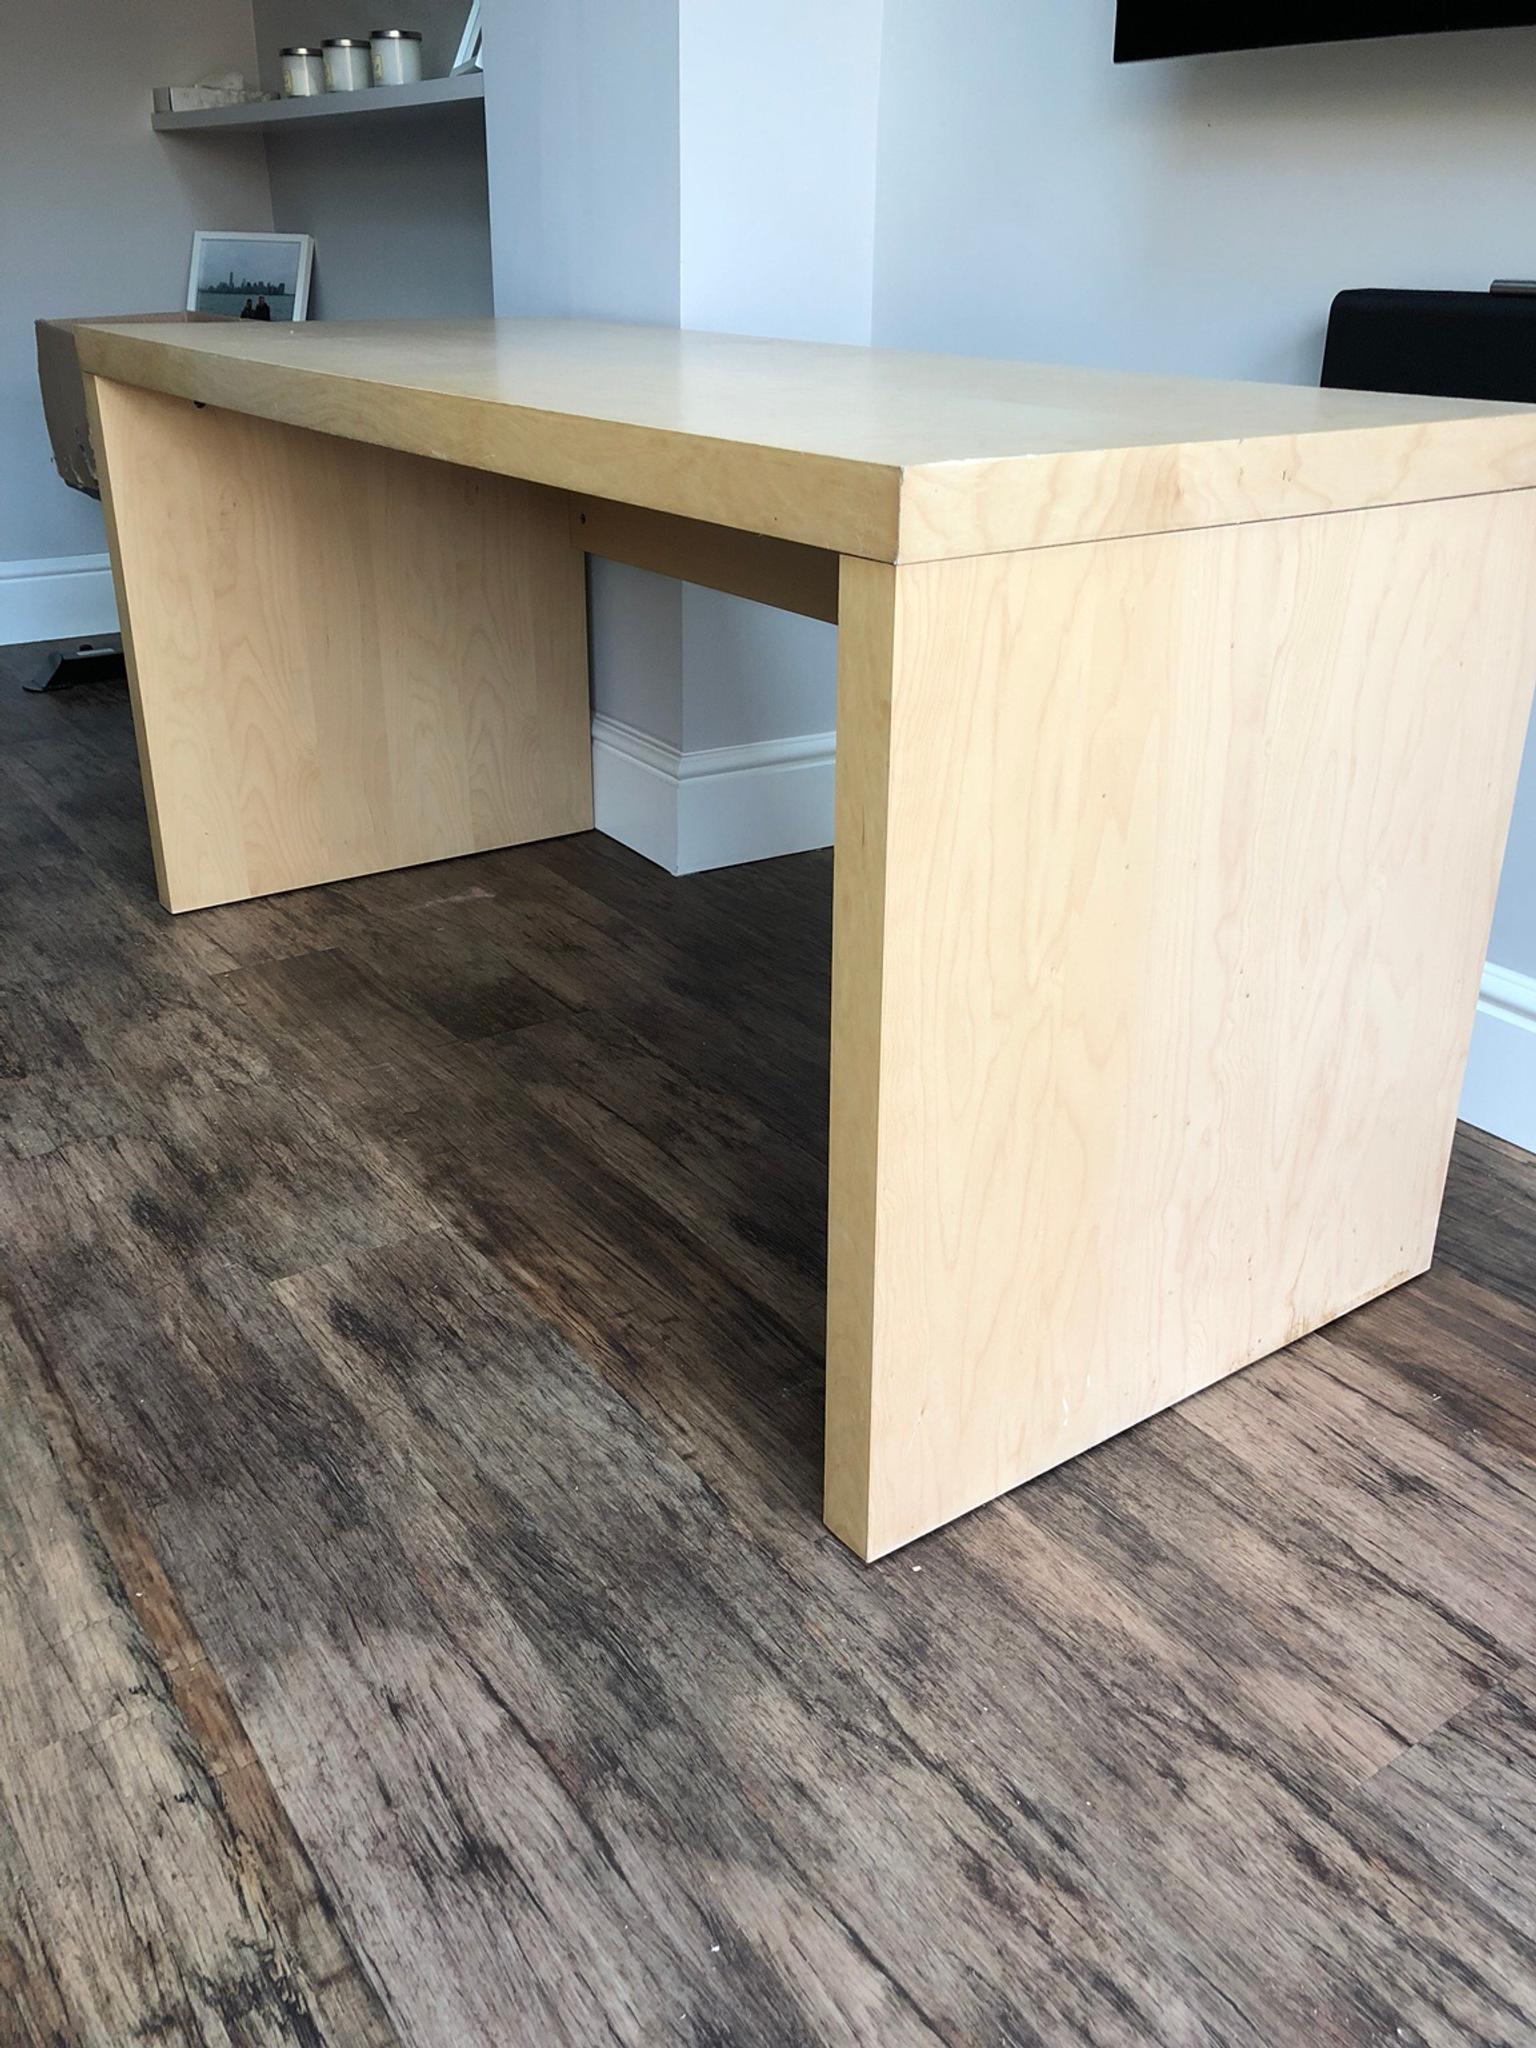 Ikea Jonas Computer Pc Desk In Cm14 Brentwood For 30 00 For Sale